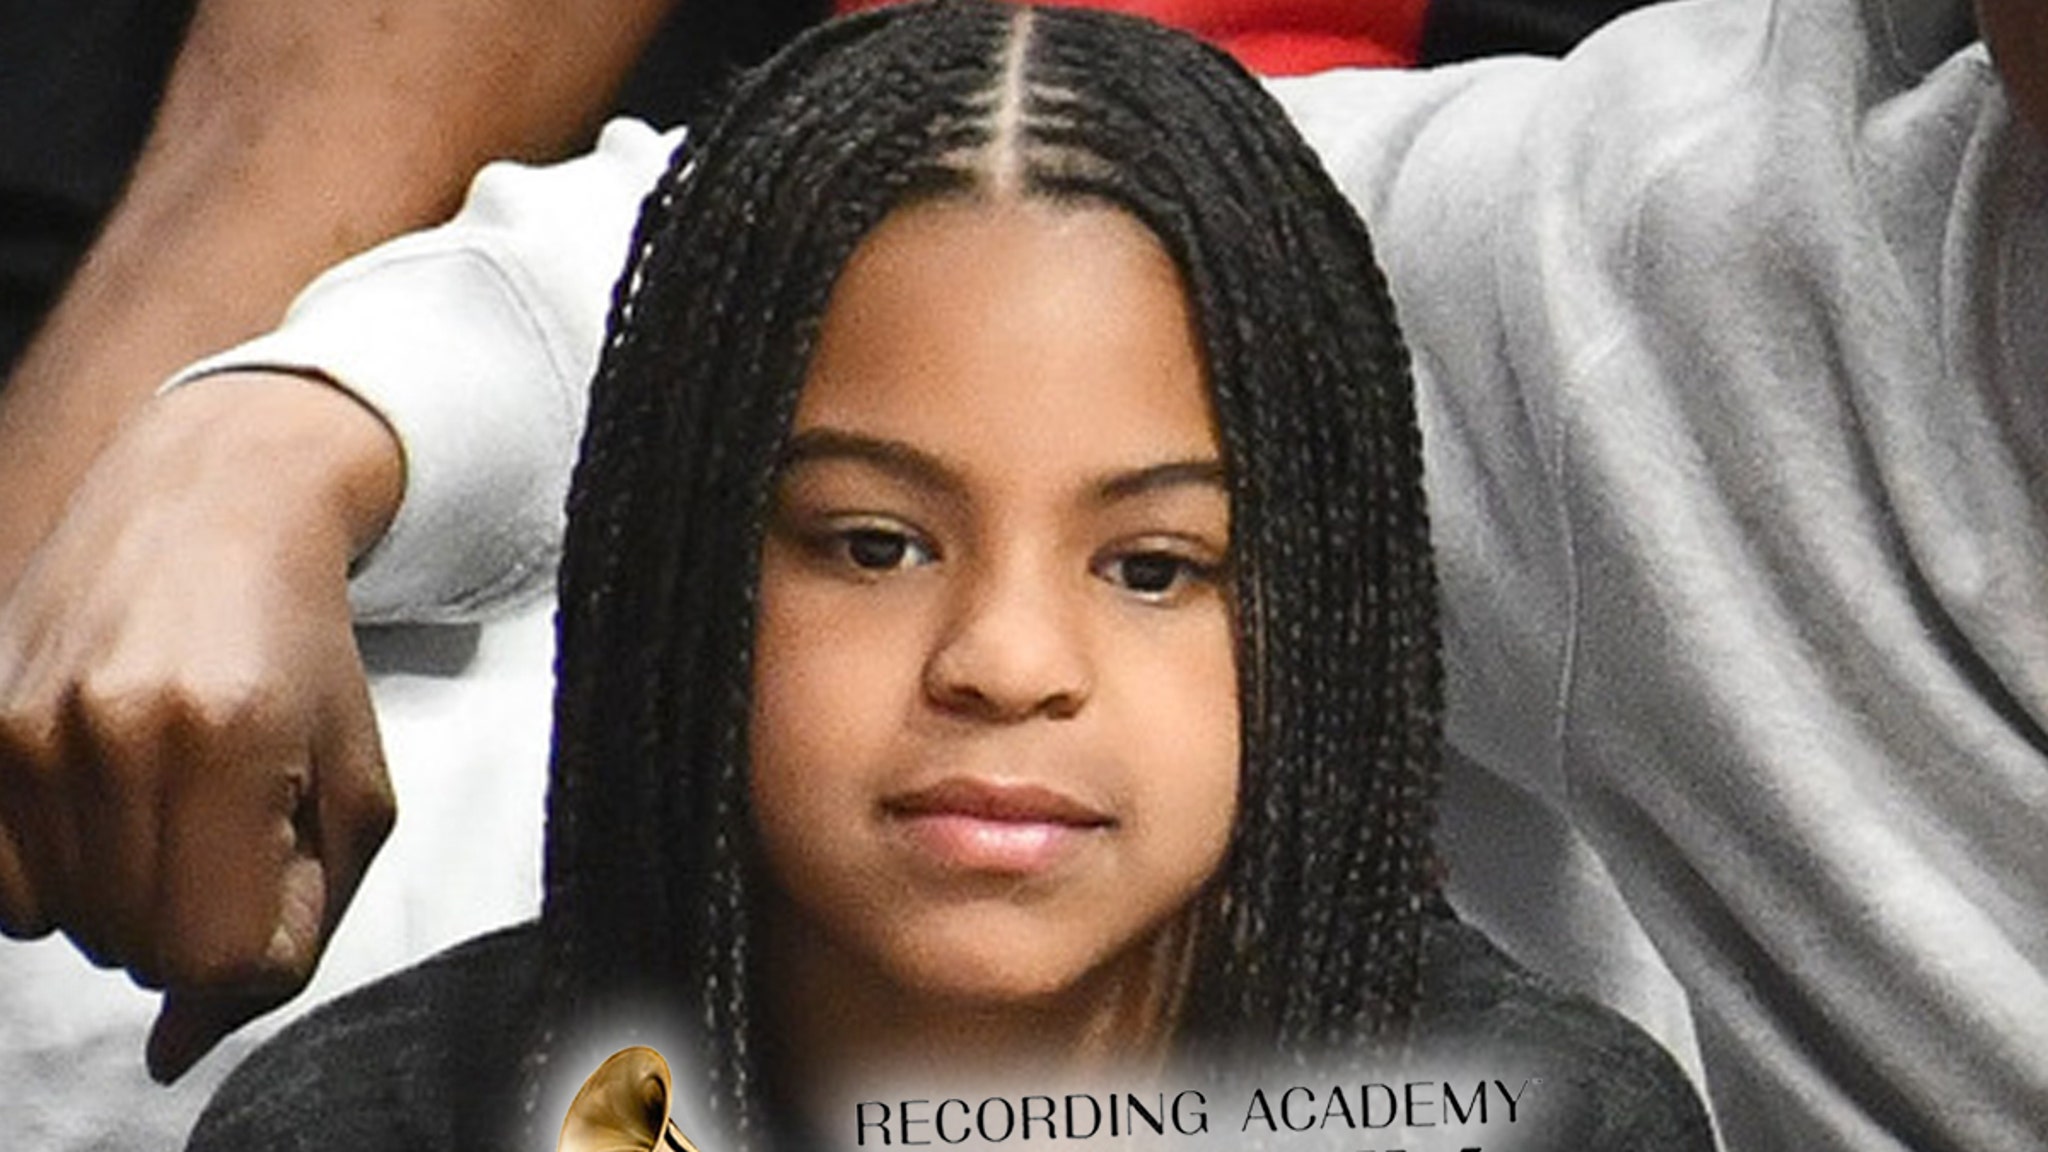 Beyonce’s 9-year-old daughter, Blue Ivy, wins her first Grammy